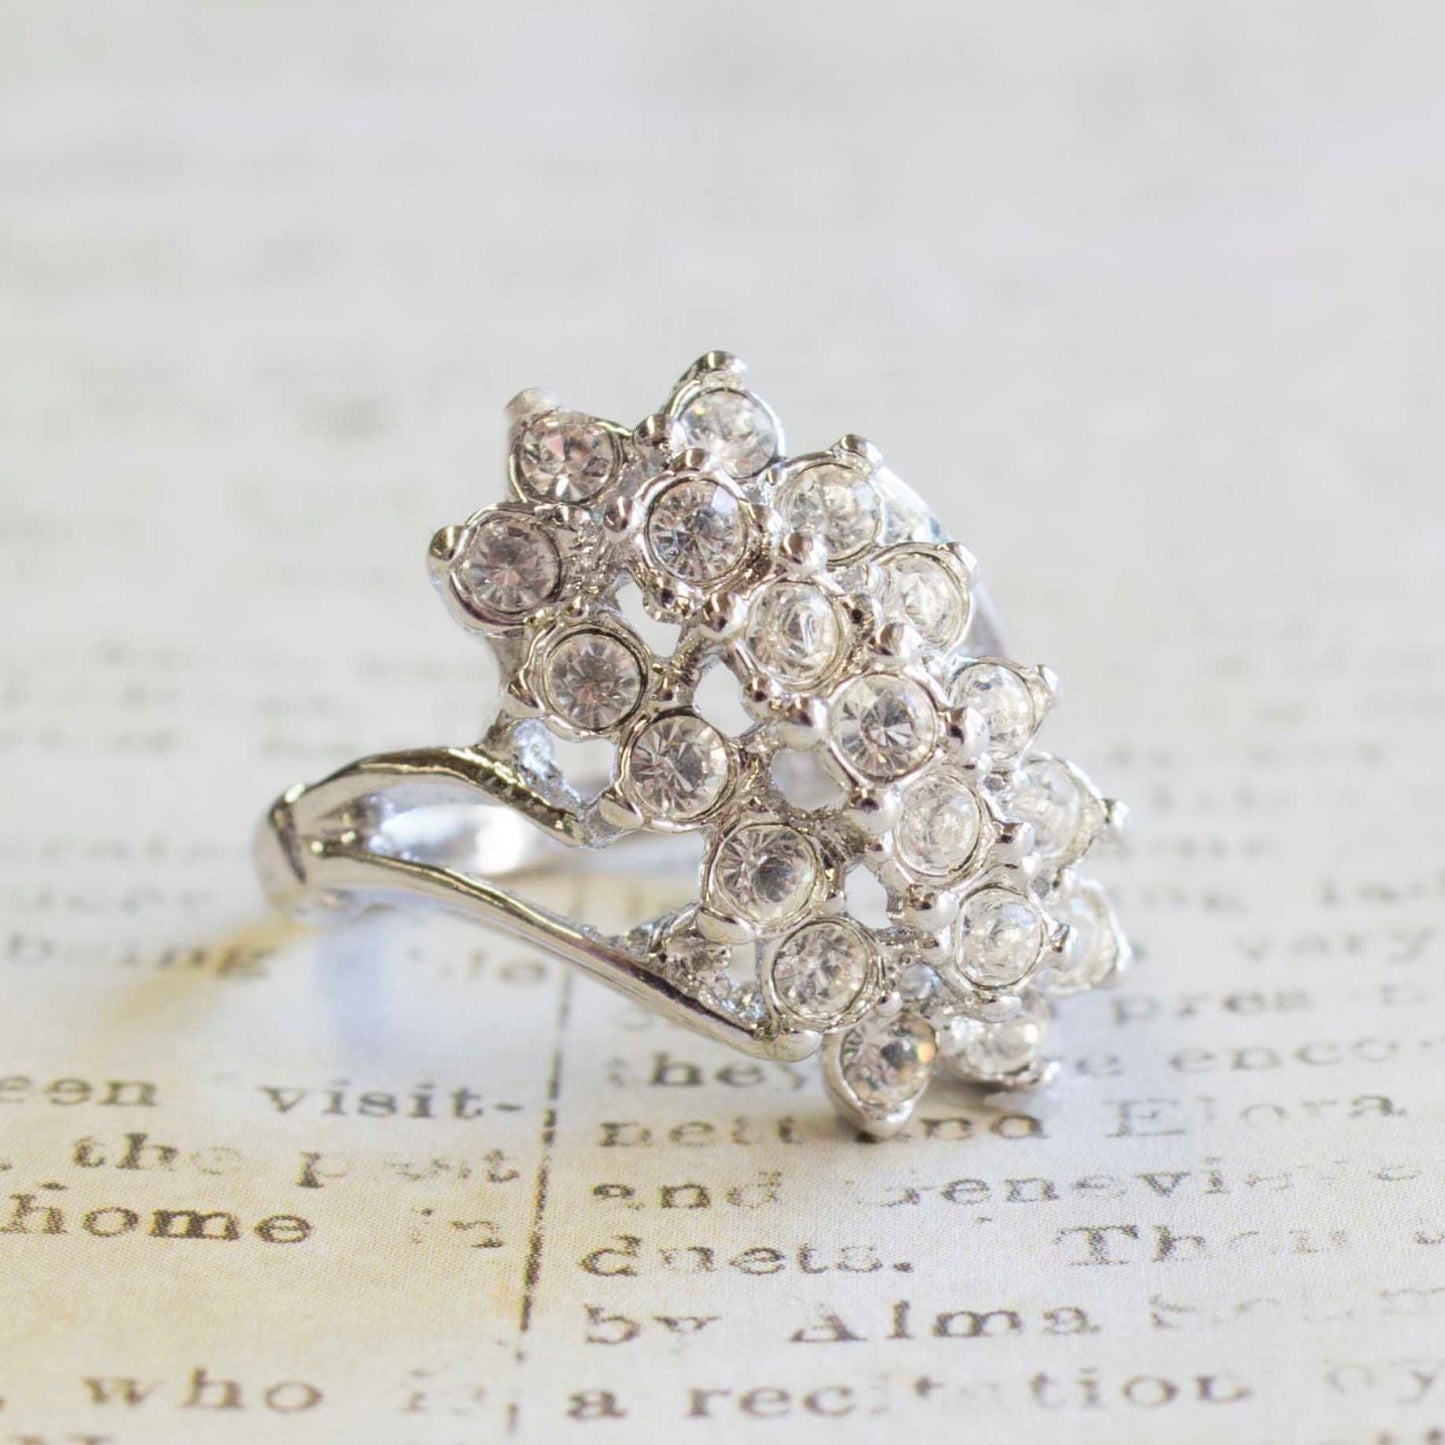 Vintage Ring Cocktail Ring Clear Swarovski Crystals 18k White Gold Silver Cluster Antique Womans Jewelry #R175